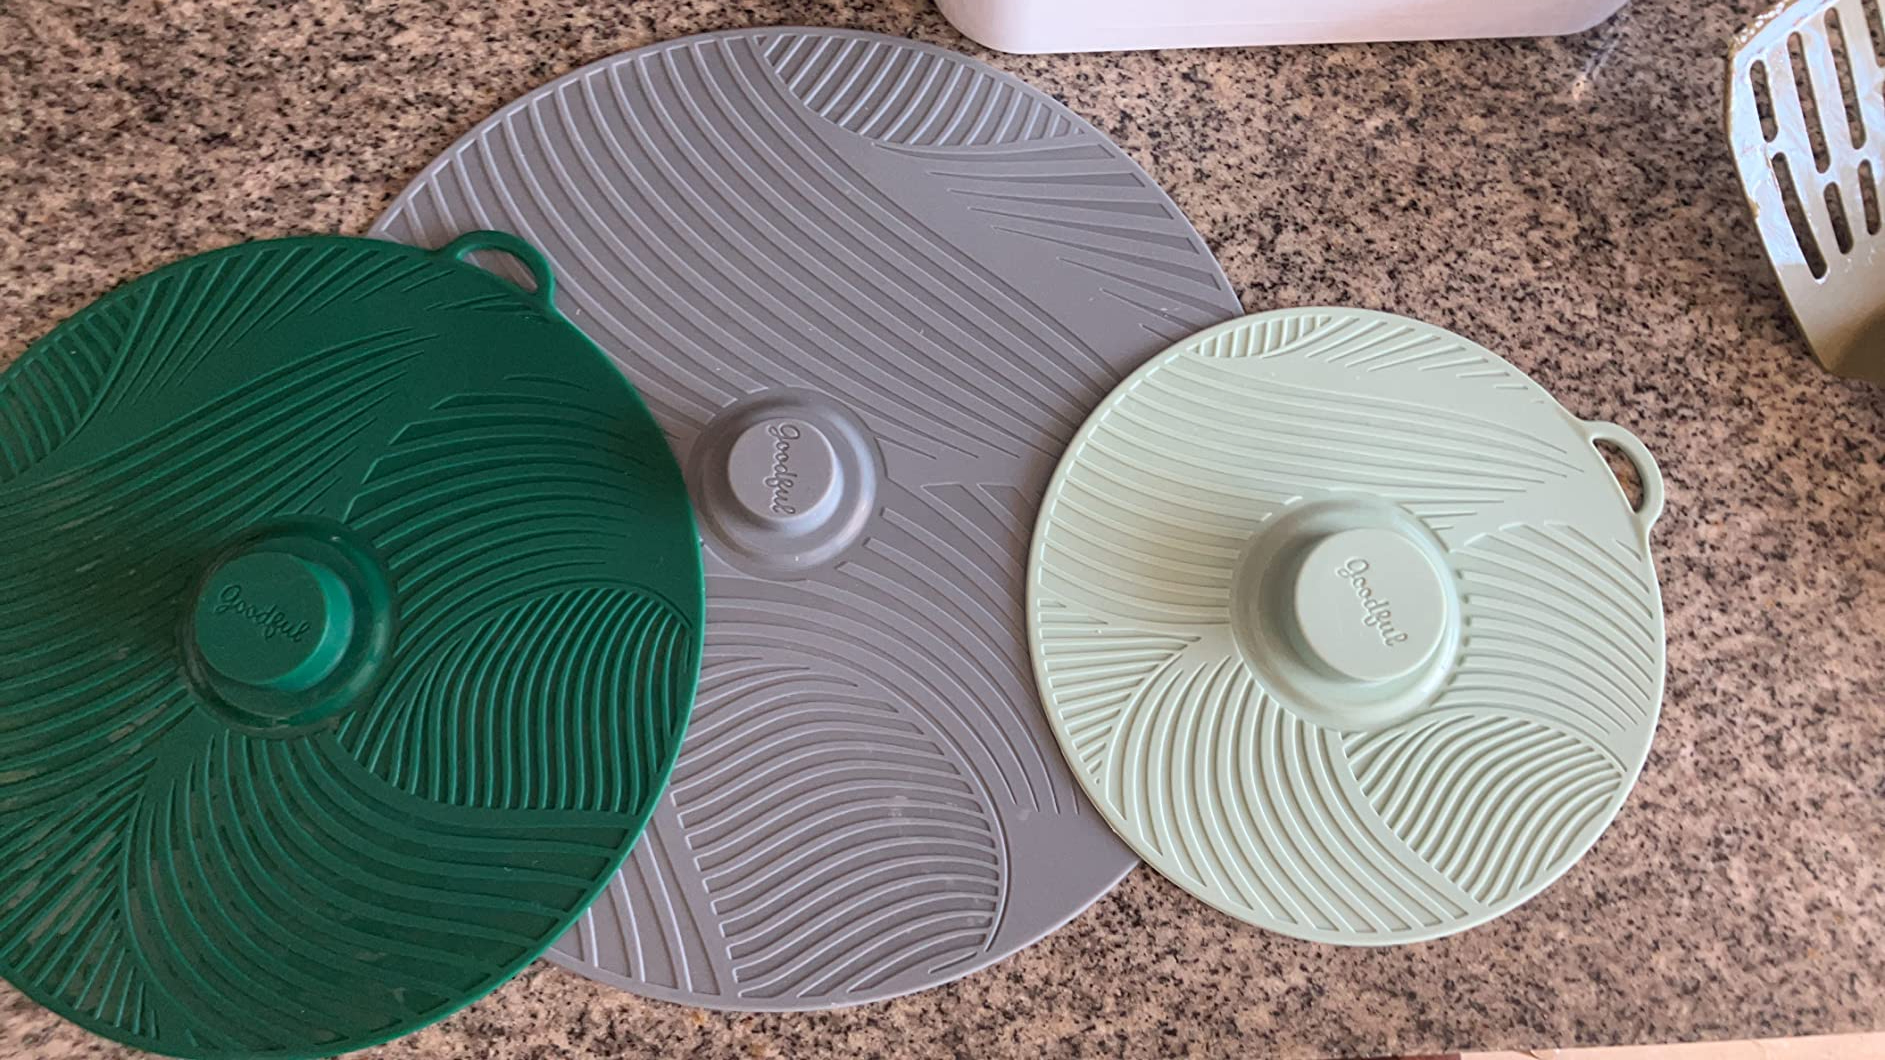 the three silicone lids in different sizes and patterns on a kitchen counter